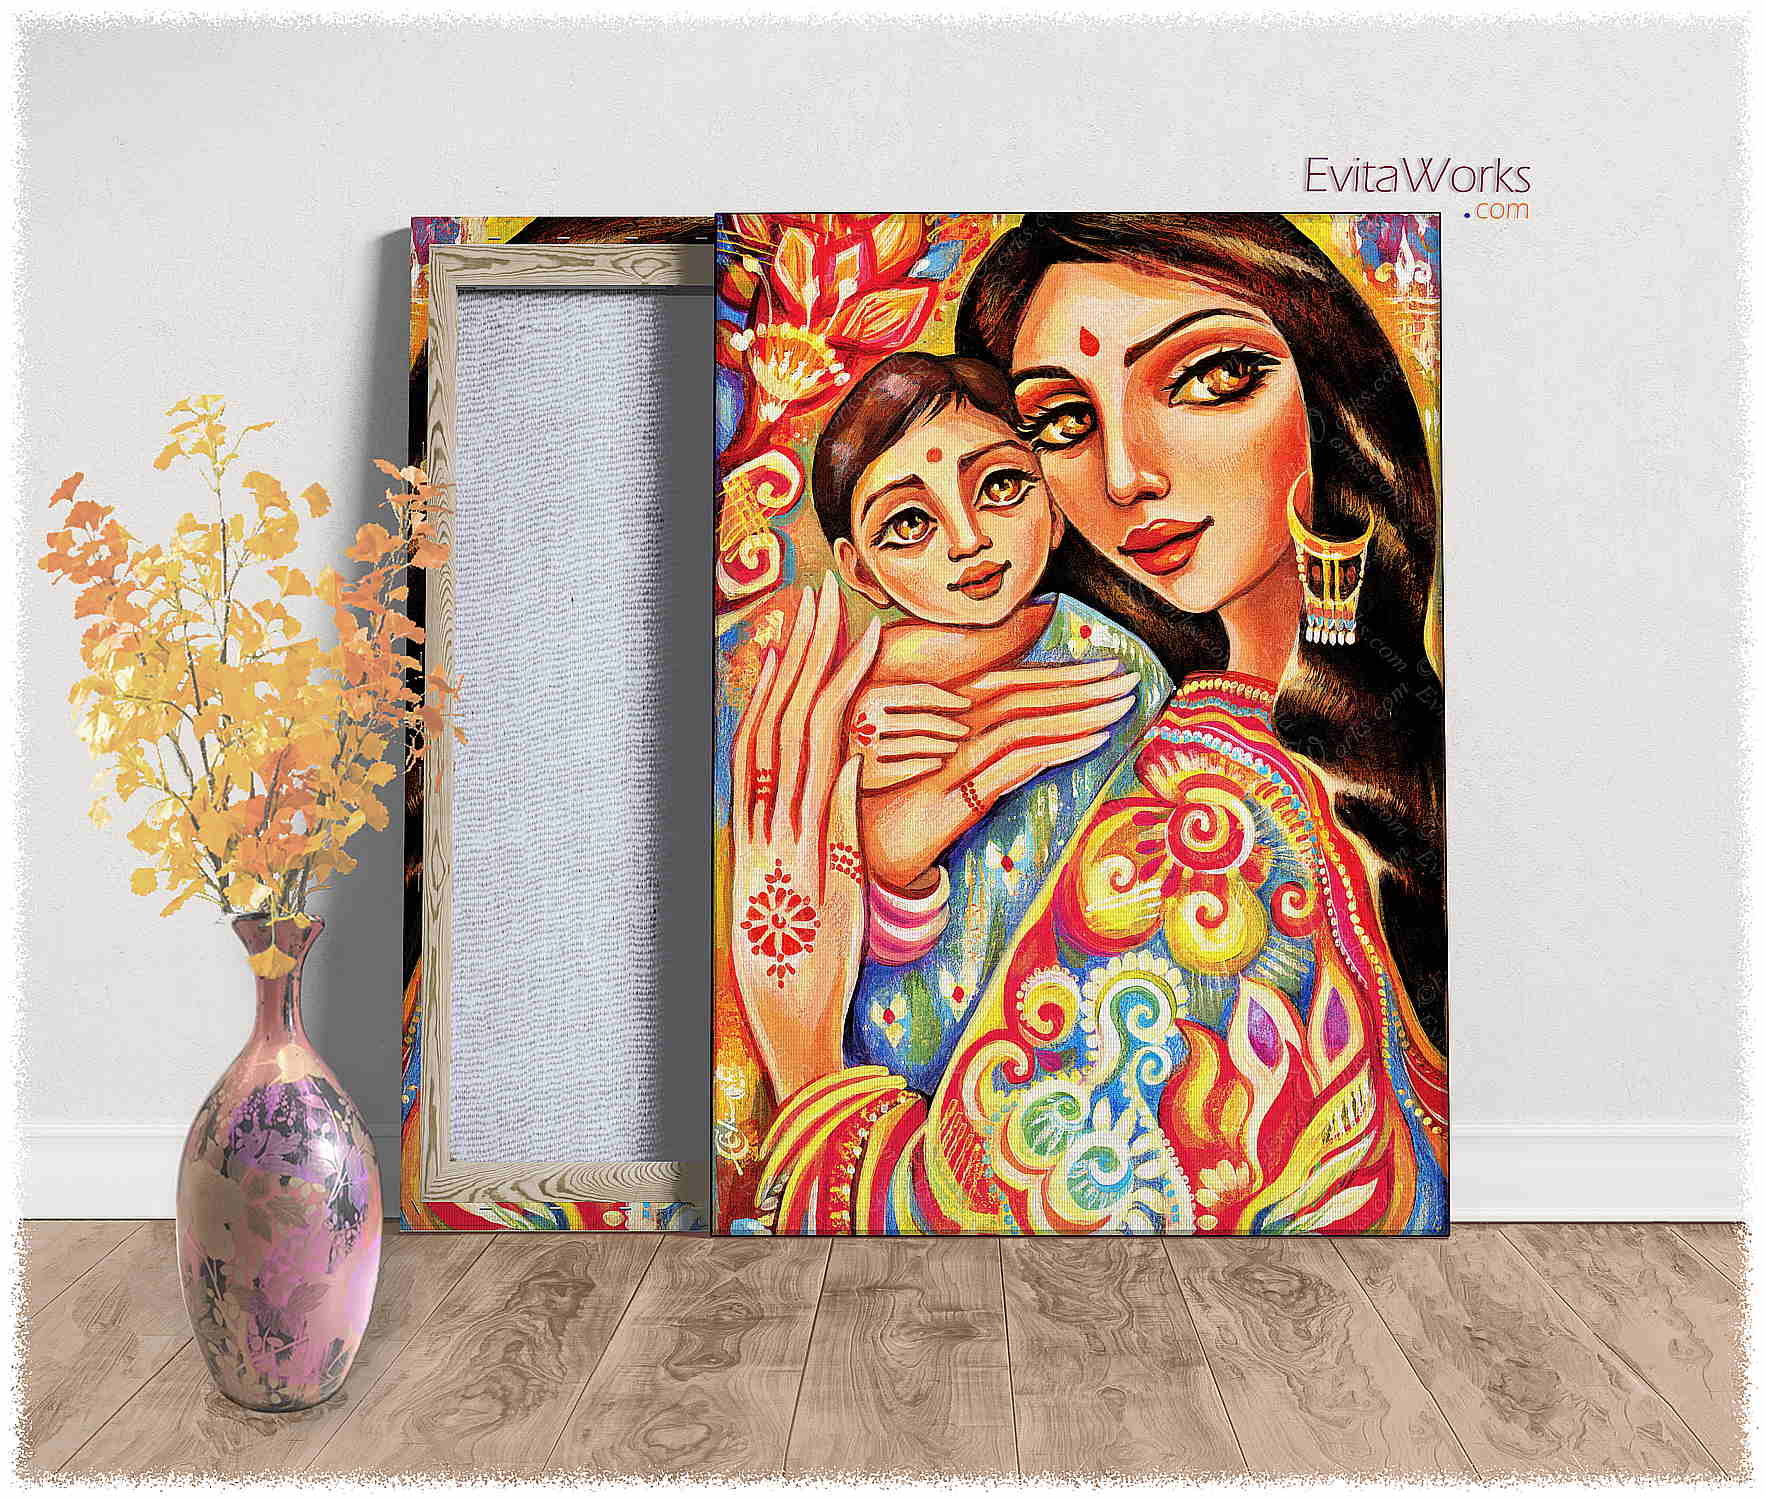 Hit to learn about "Goddess Blessing, Mother and Child" on canvases